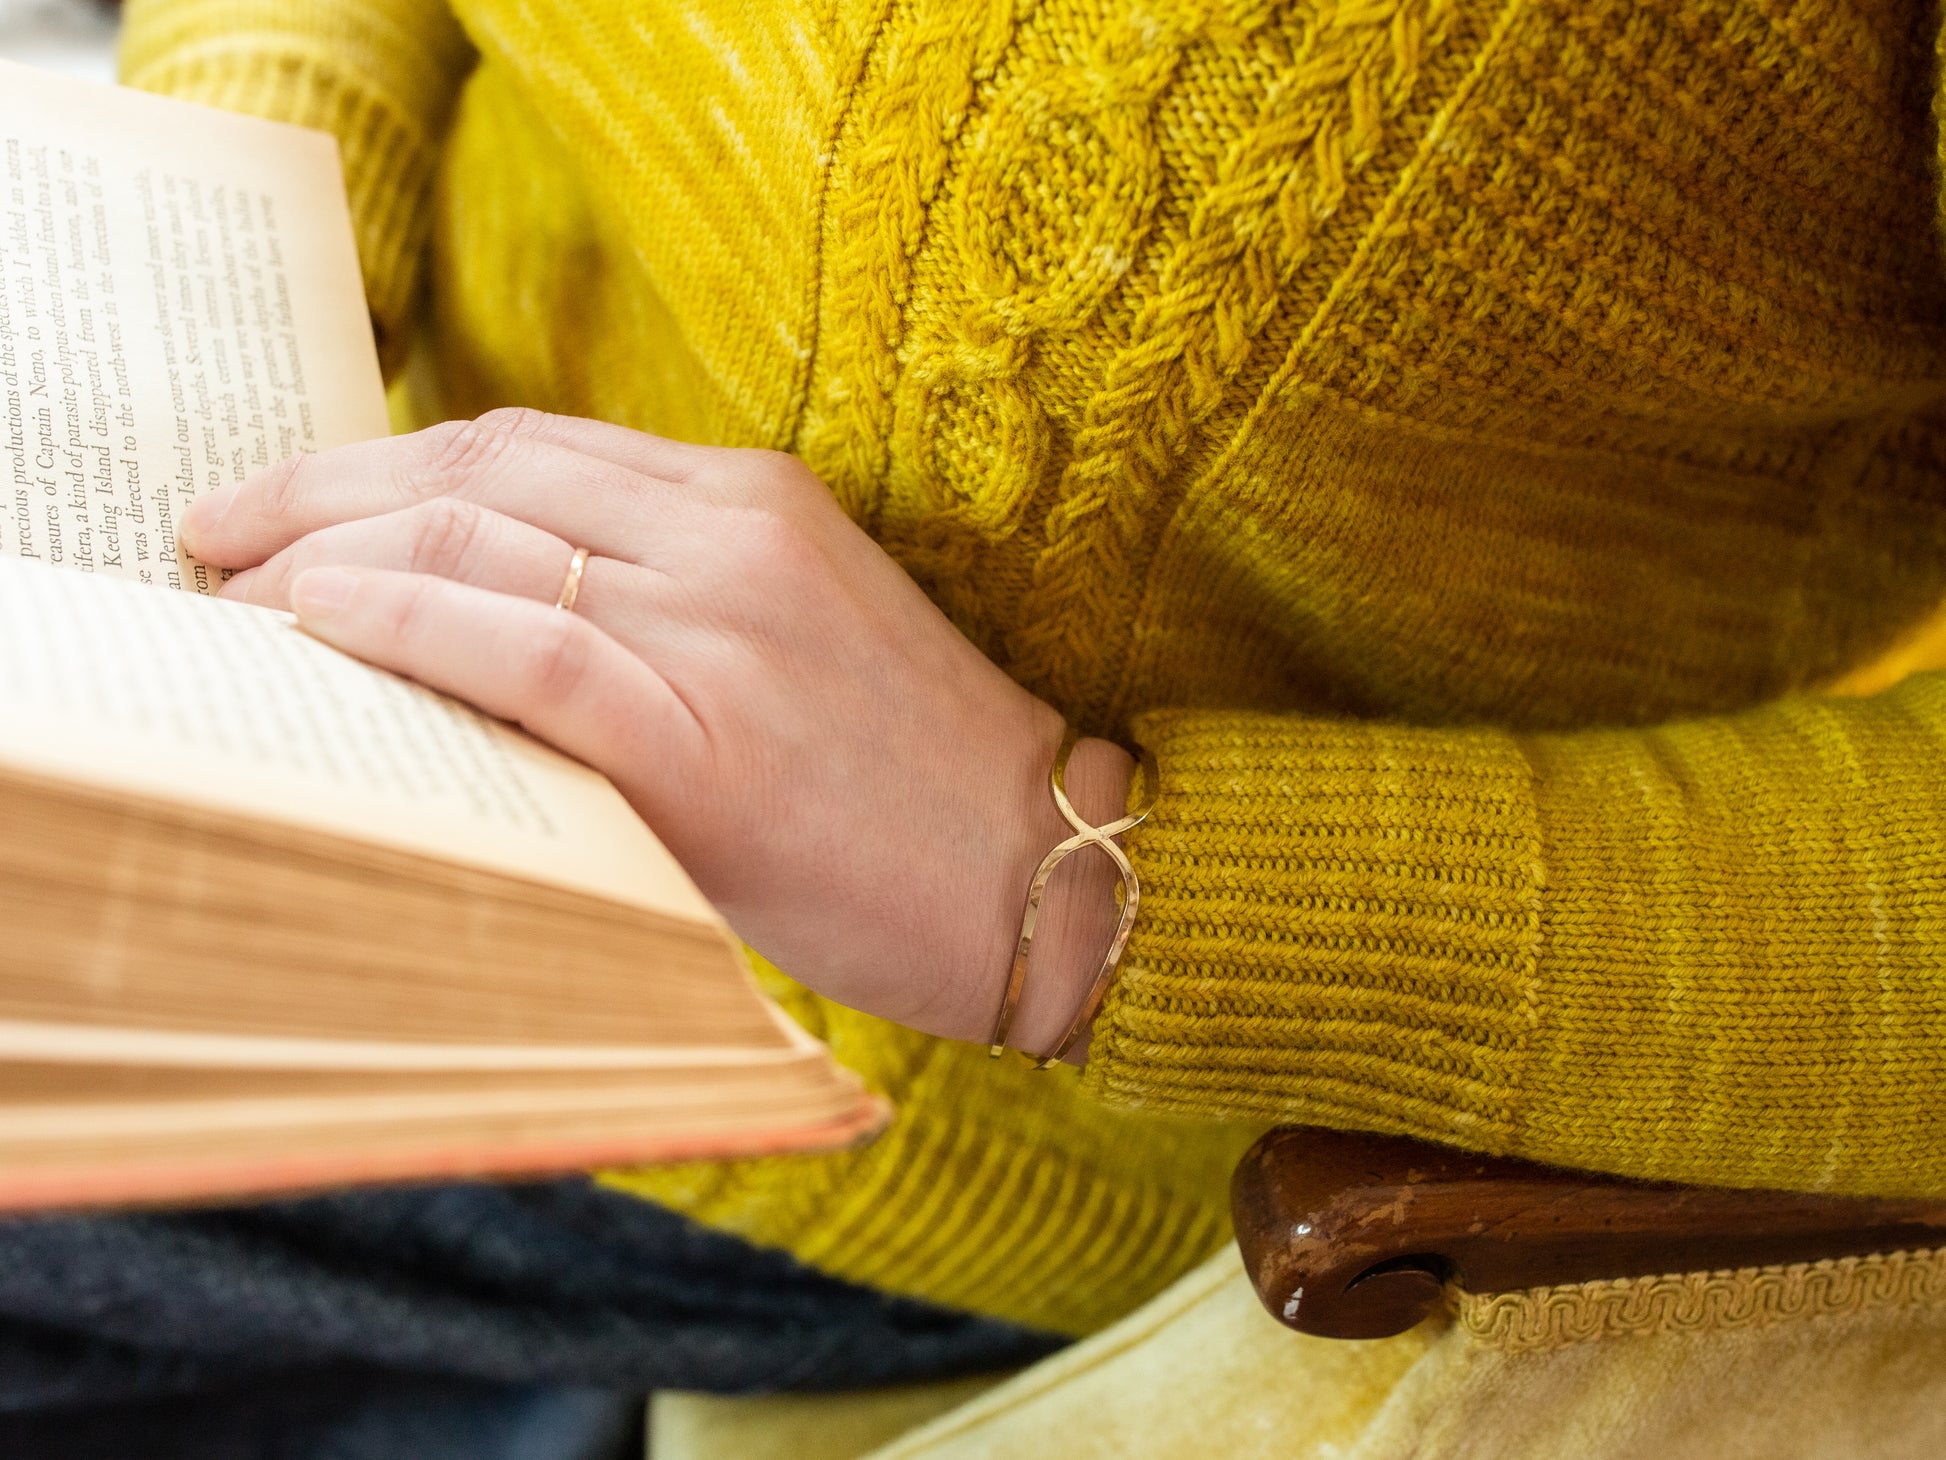 Seen close up, Jen reads a book while wearing a bright yellow sweater. The camera focuses on the ribbed cuff and cable sections of the sweater.